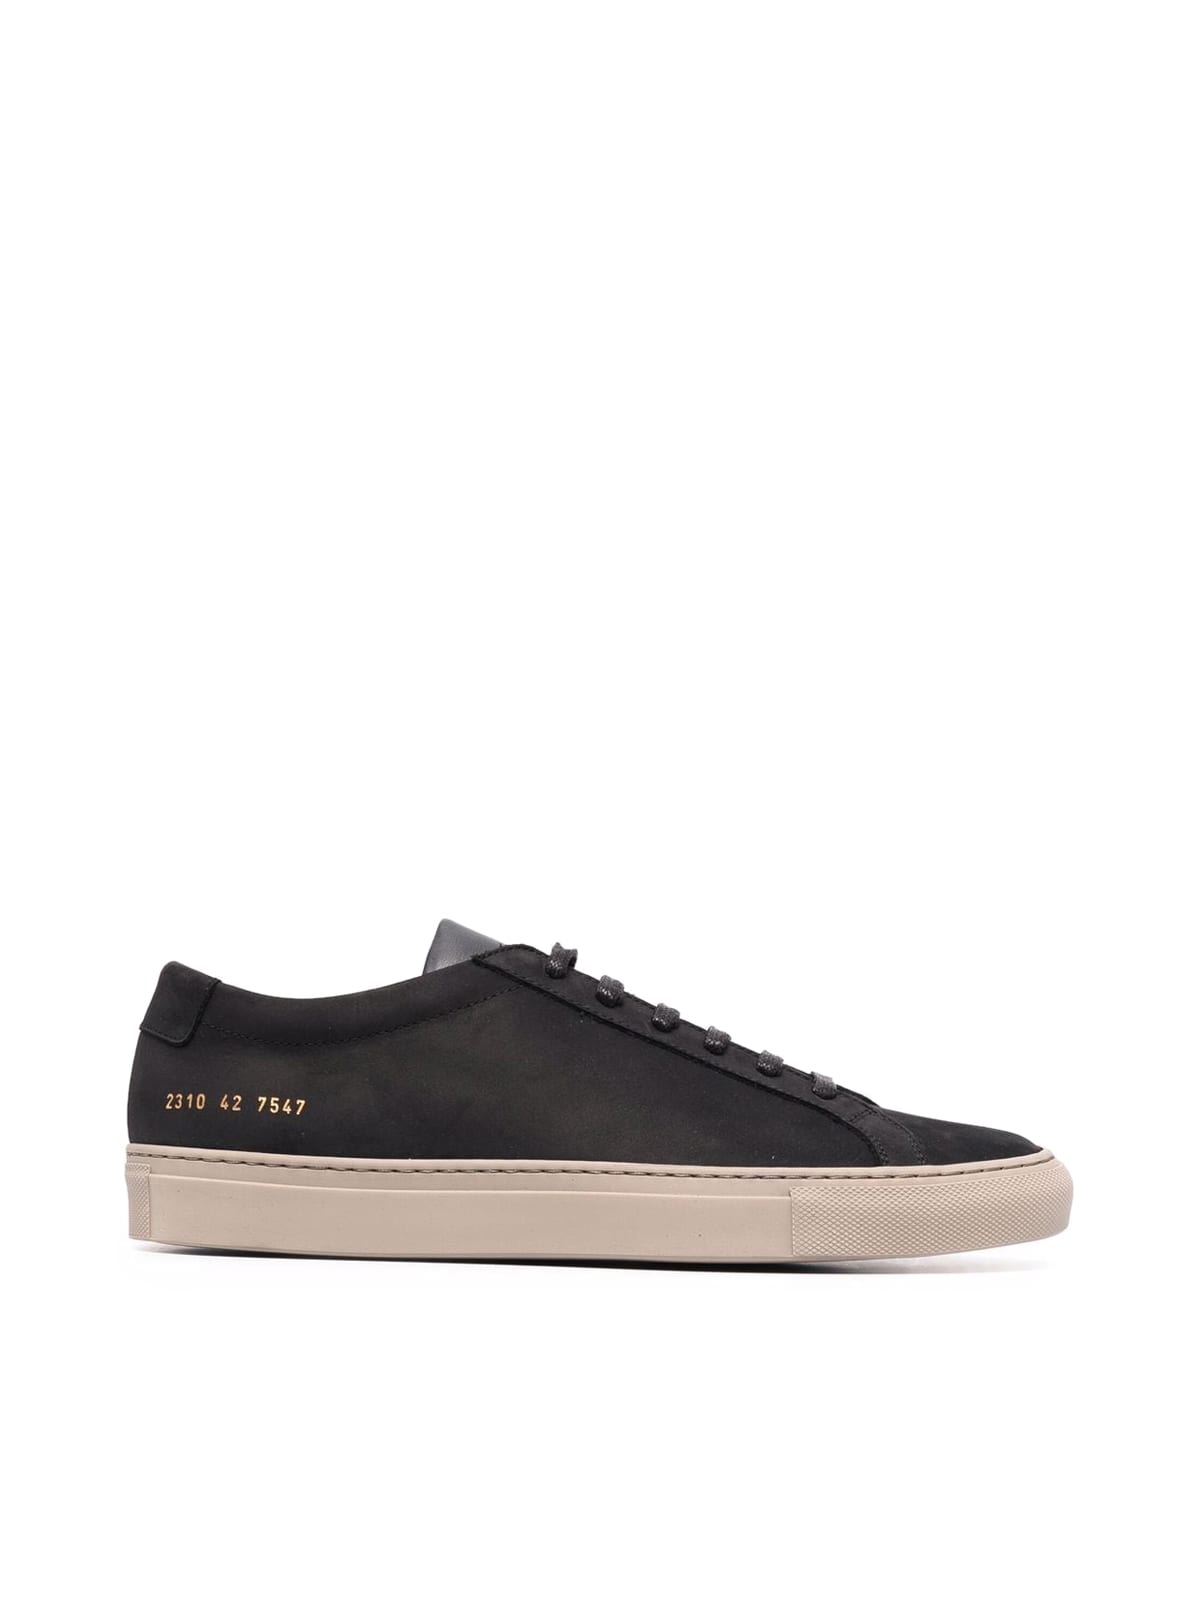 Common Projects Achilles Low In Nubuck 2310